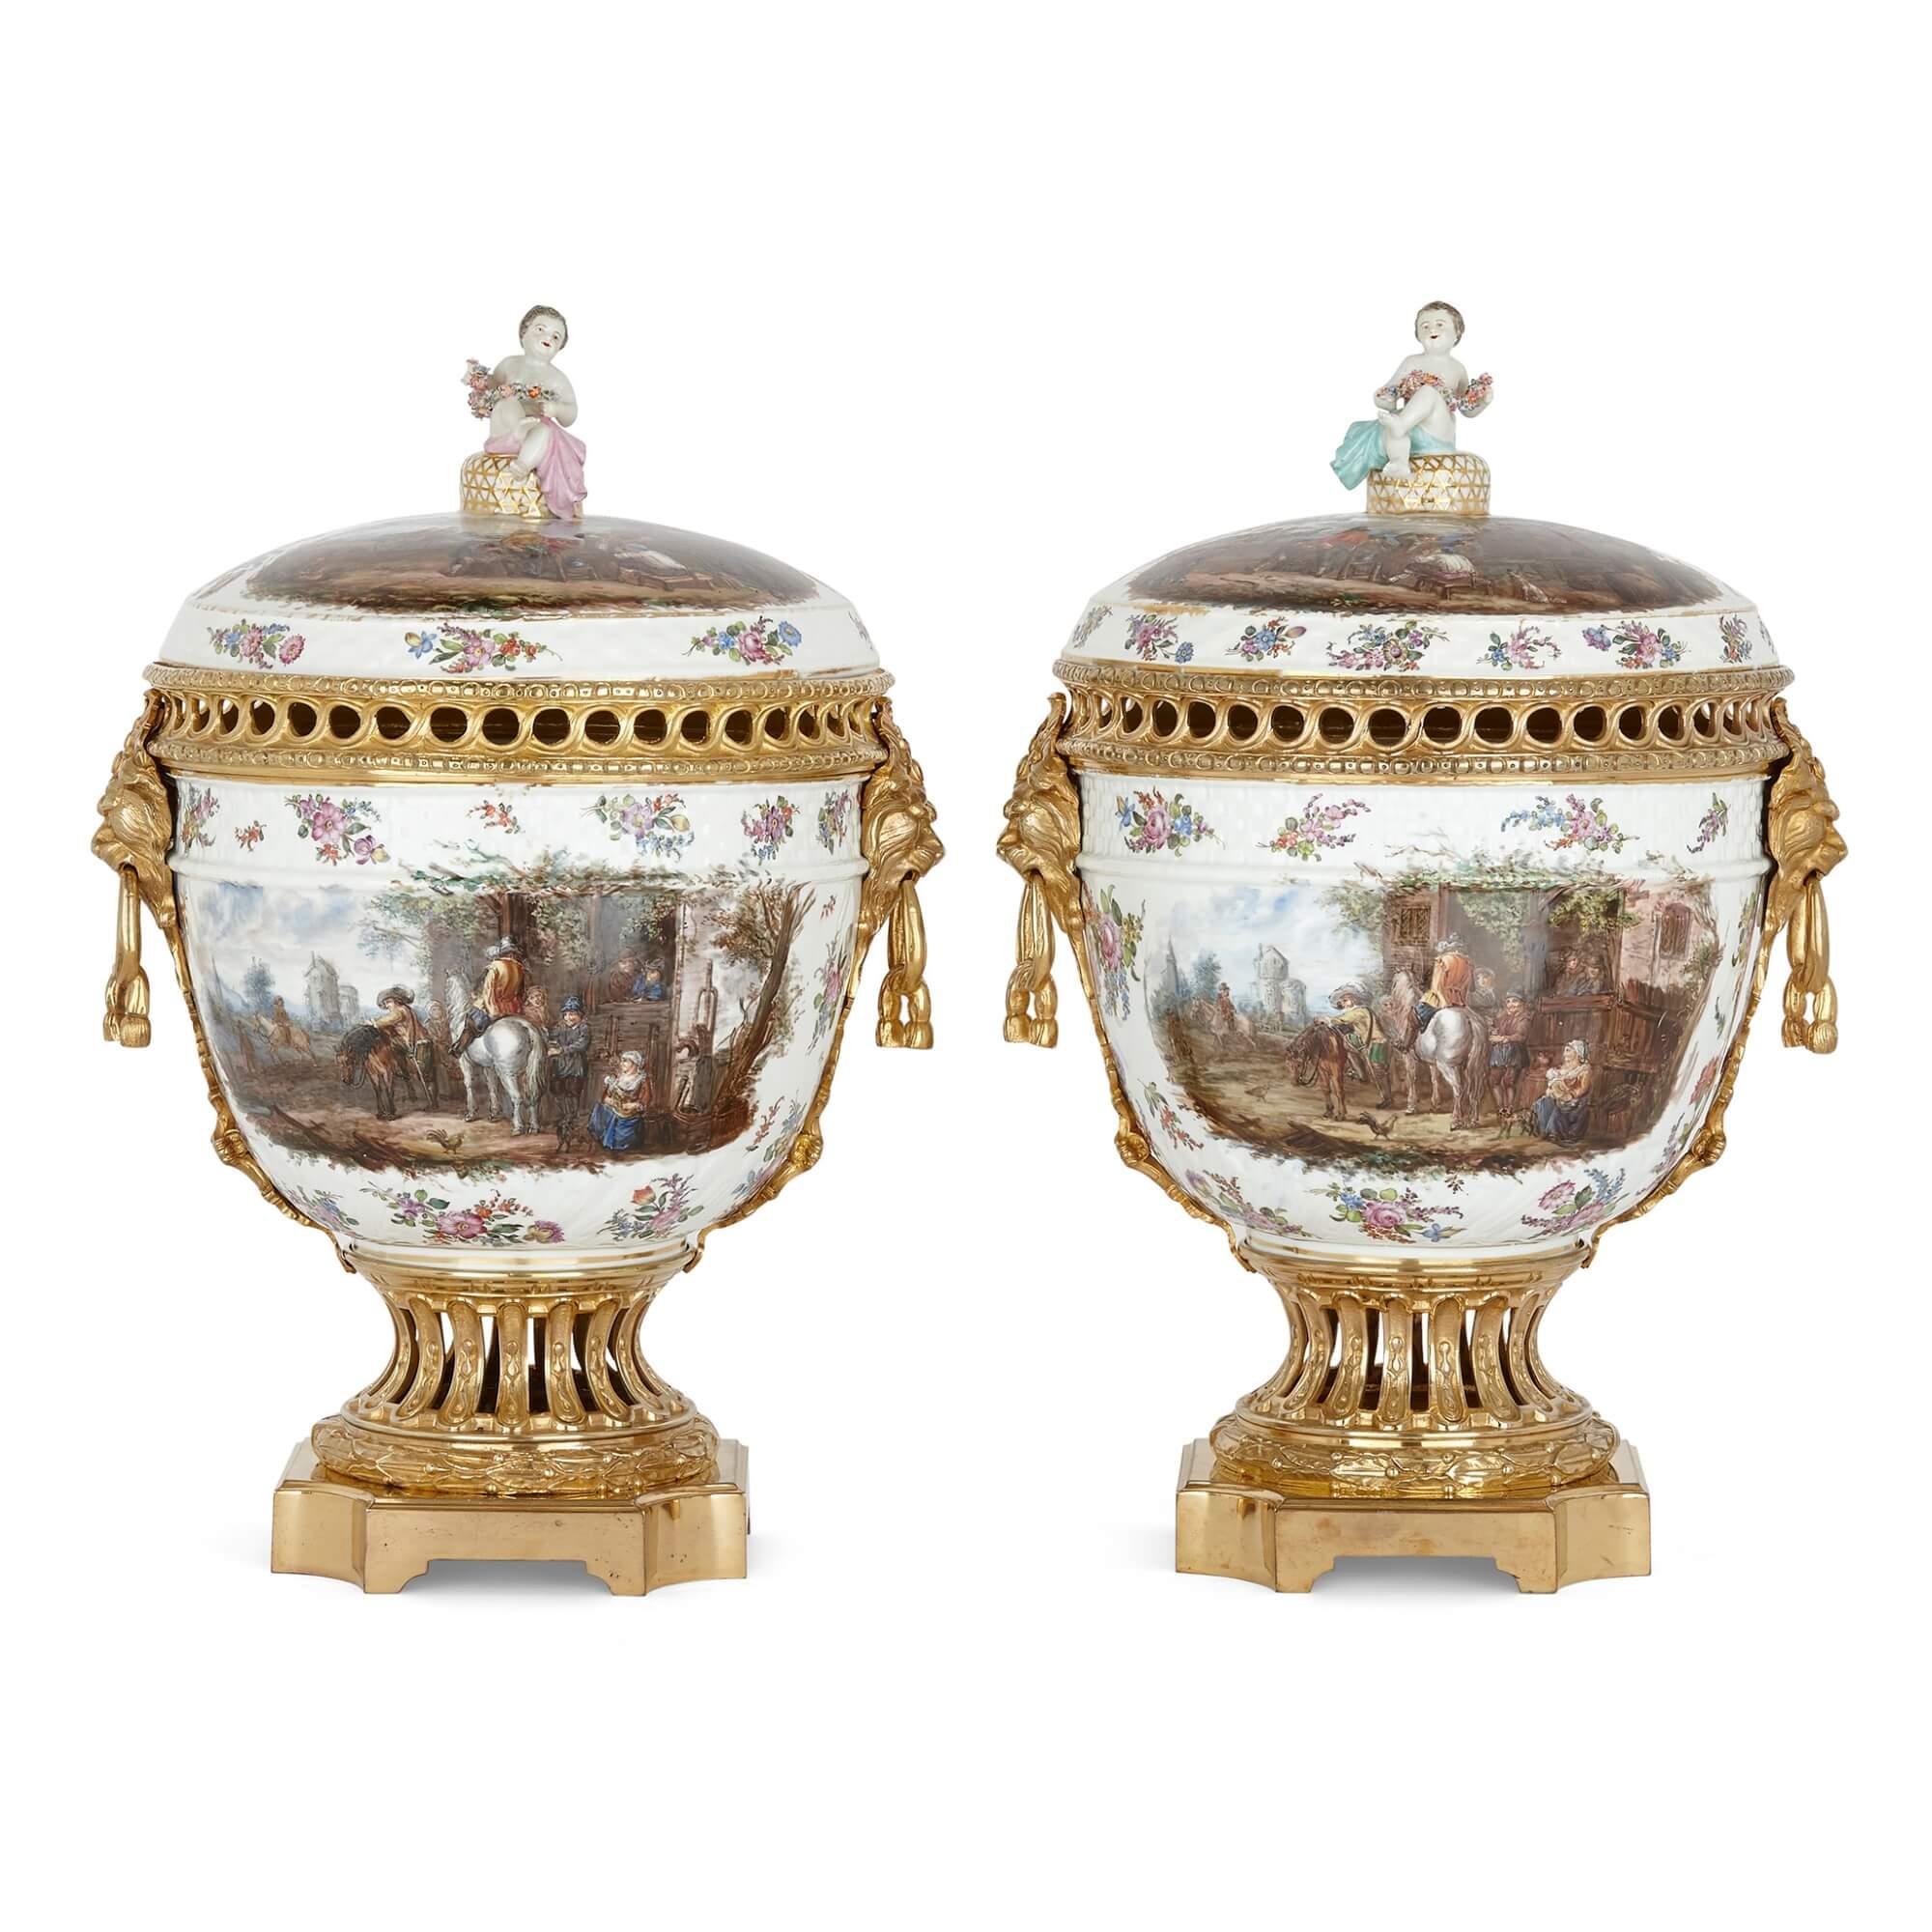 Pair of Dresden porcelain and gilt bronze vases.
German, late 19th century.
Measures: height 57cm, width 39cm, depth 33cm.

This fine pair of Dresden porcelain pot pourri vases features ornate gilt bronze mounts. The vases have krater-shaped,